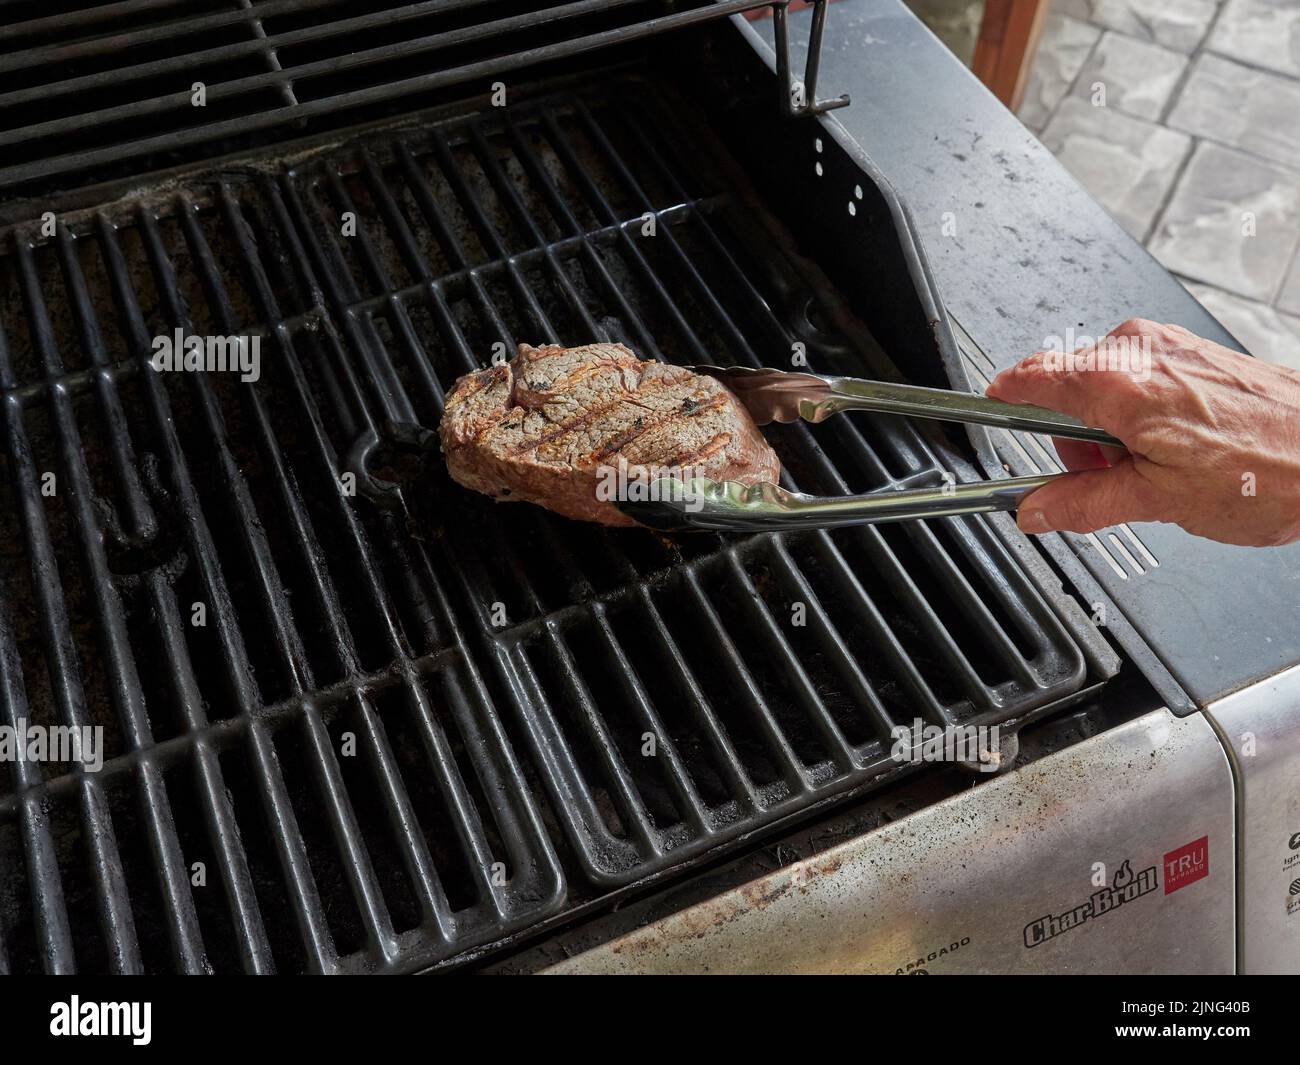 Filet steak grilling on a home barbecue grill for a dinner meal. Stock Photo